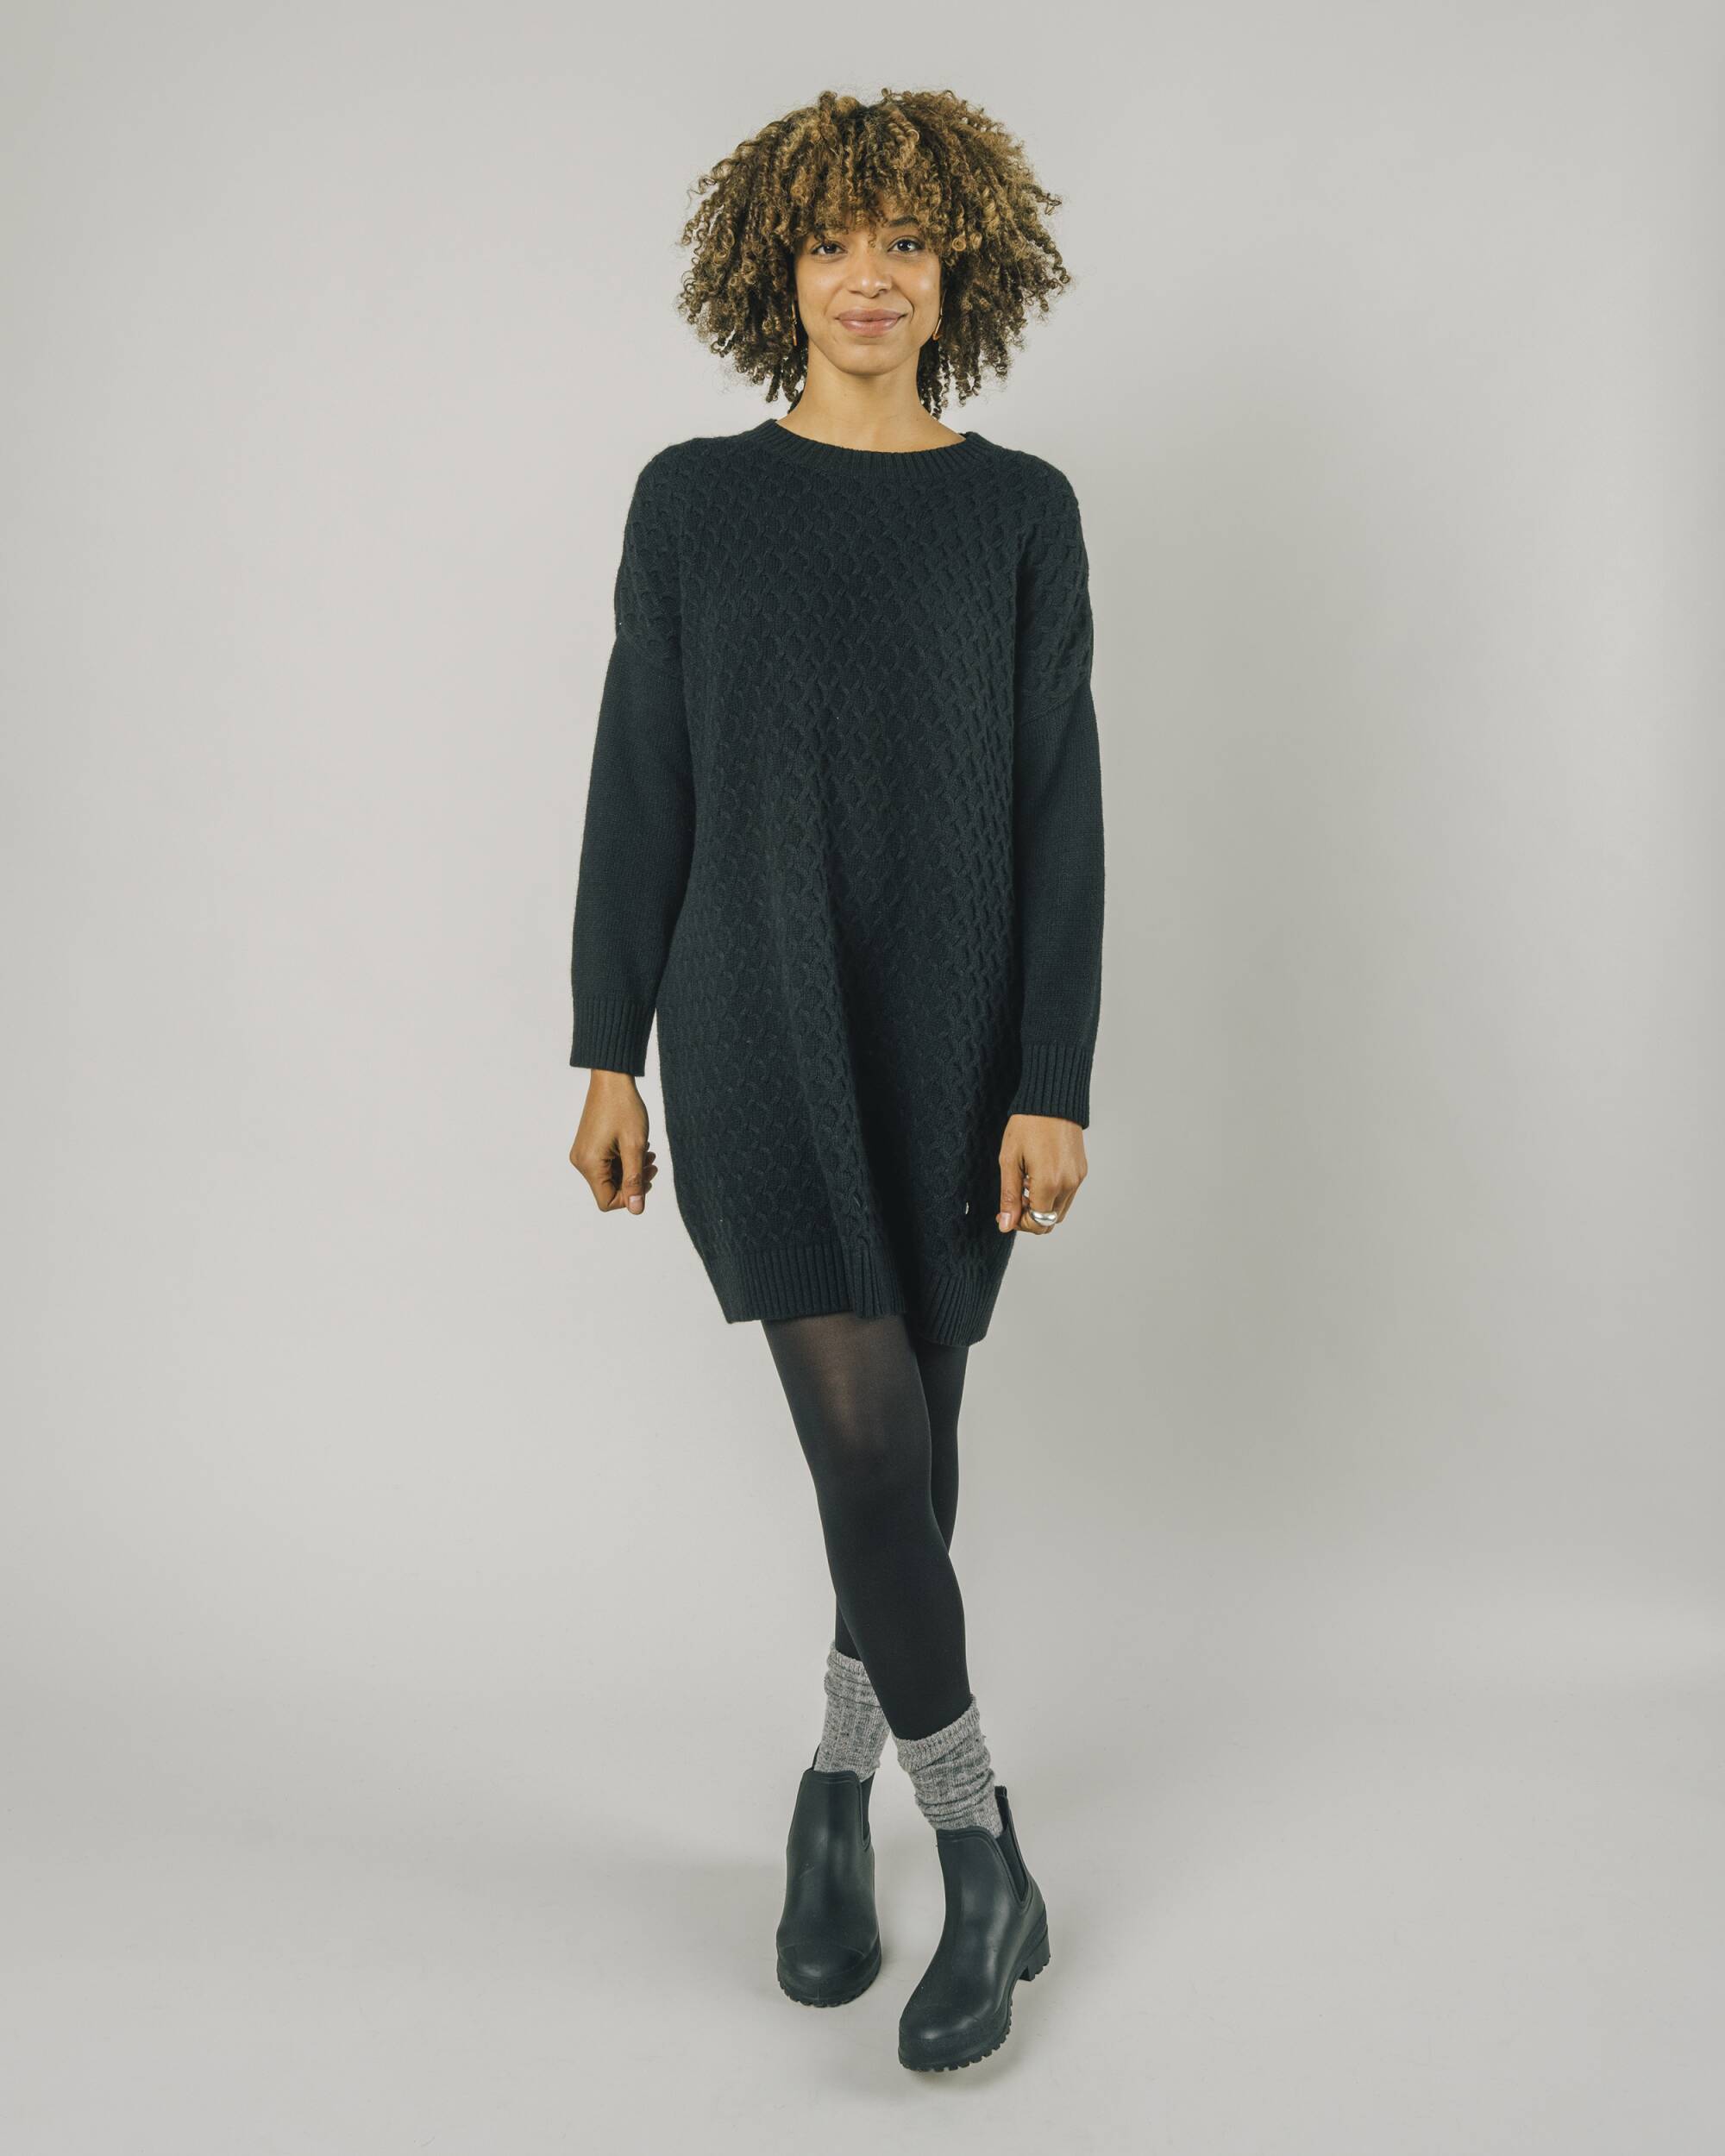 Black dress made from recycled cashmere, recycled wool, recycled polyamide and lyocell from Brava Fabrics